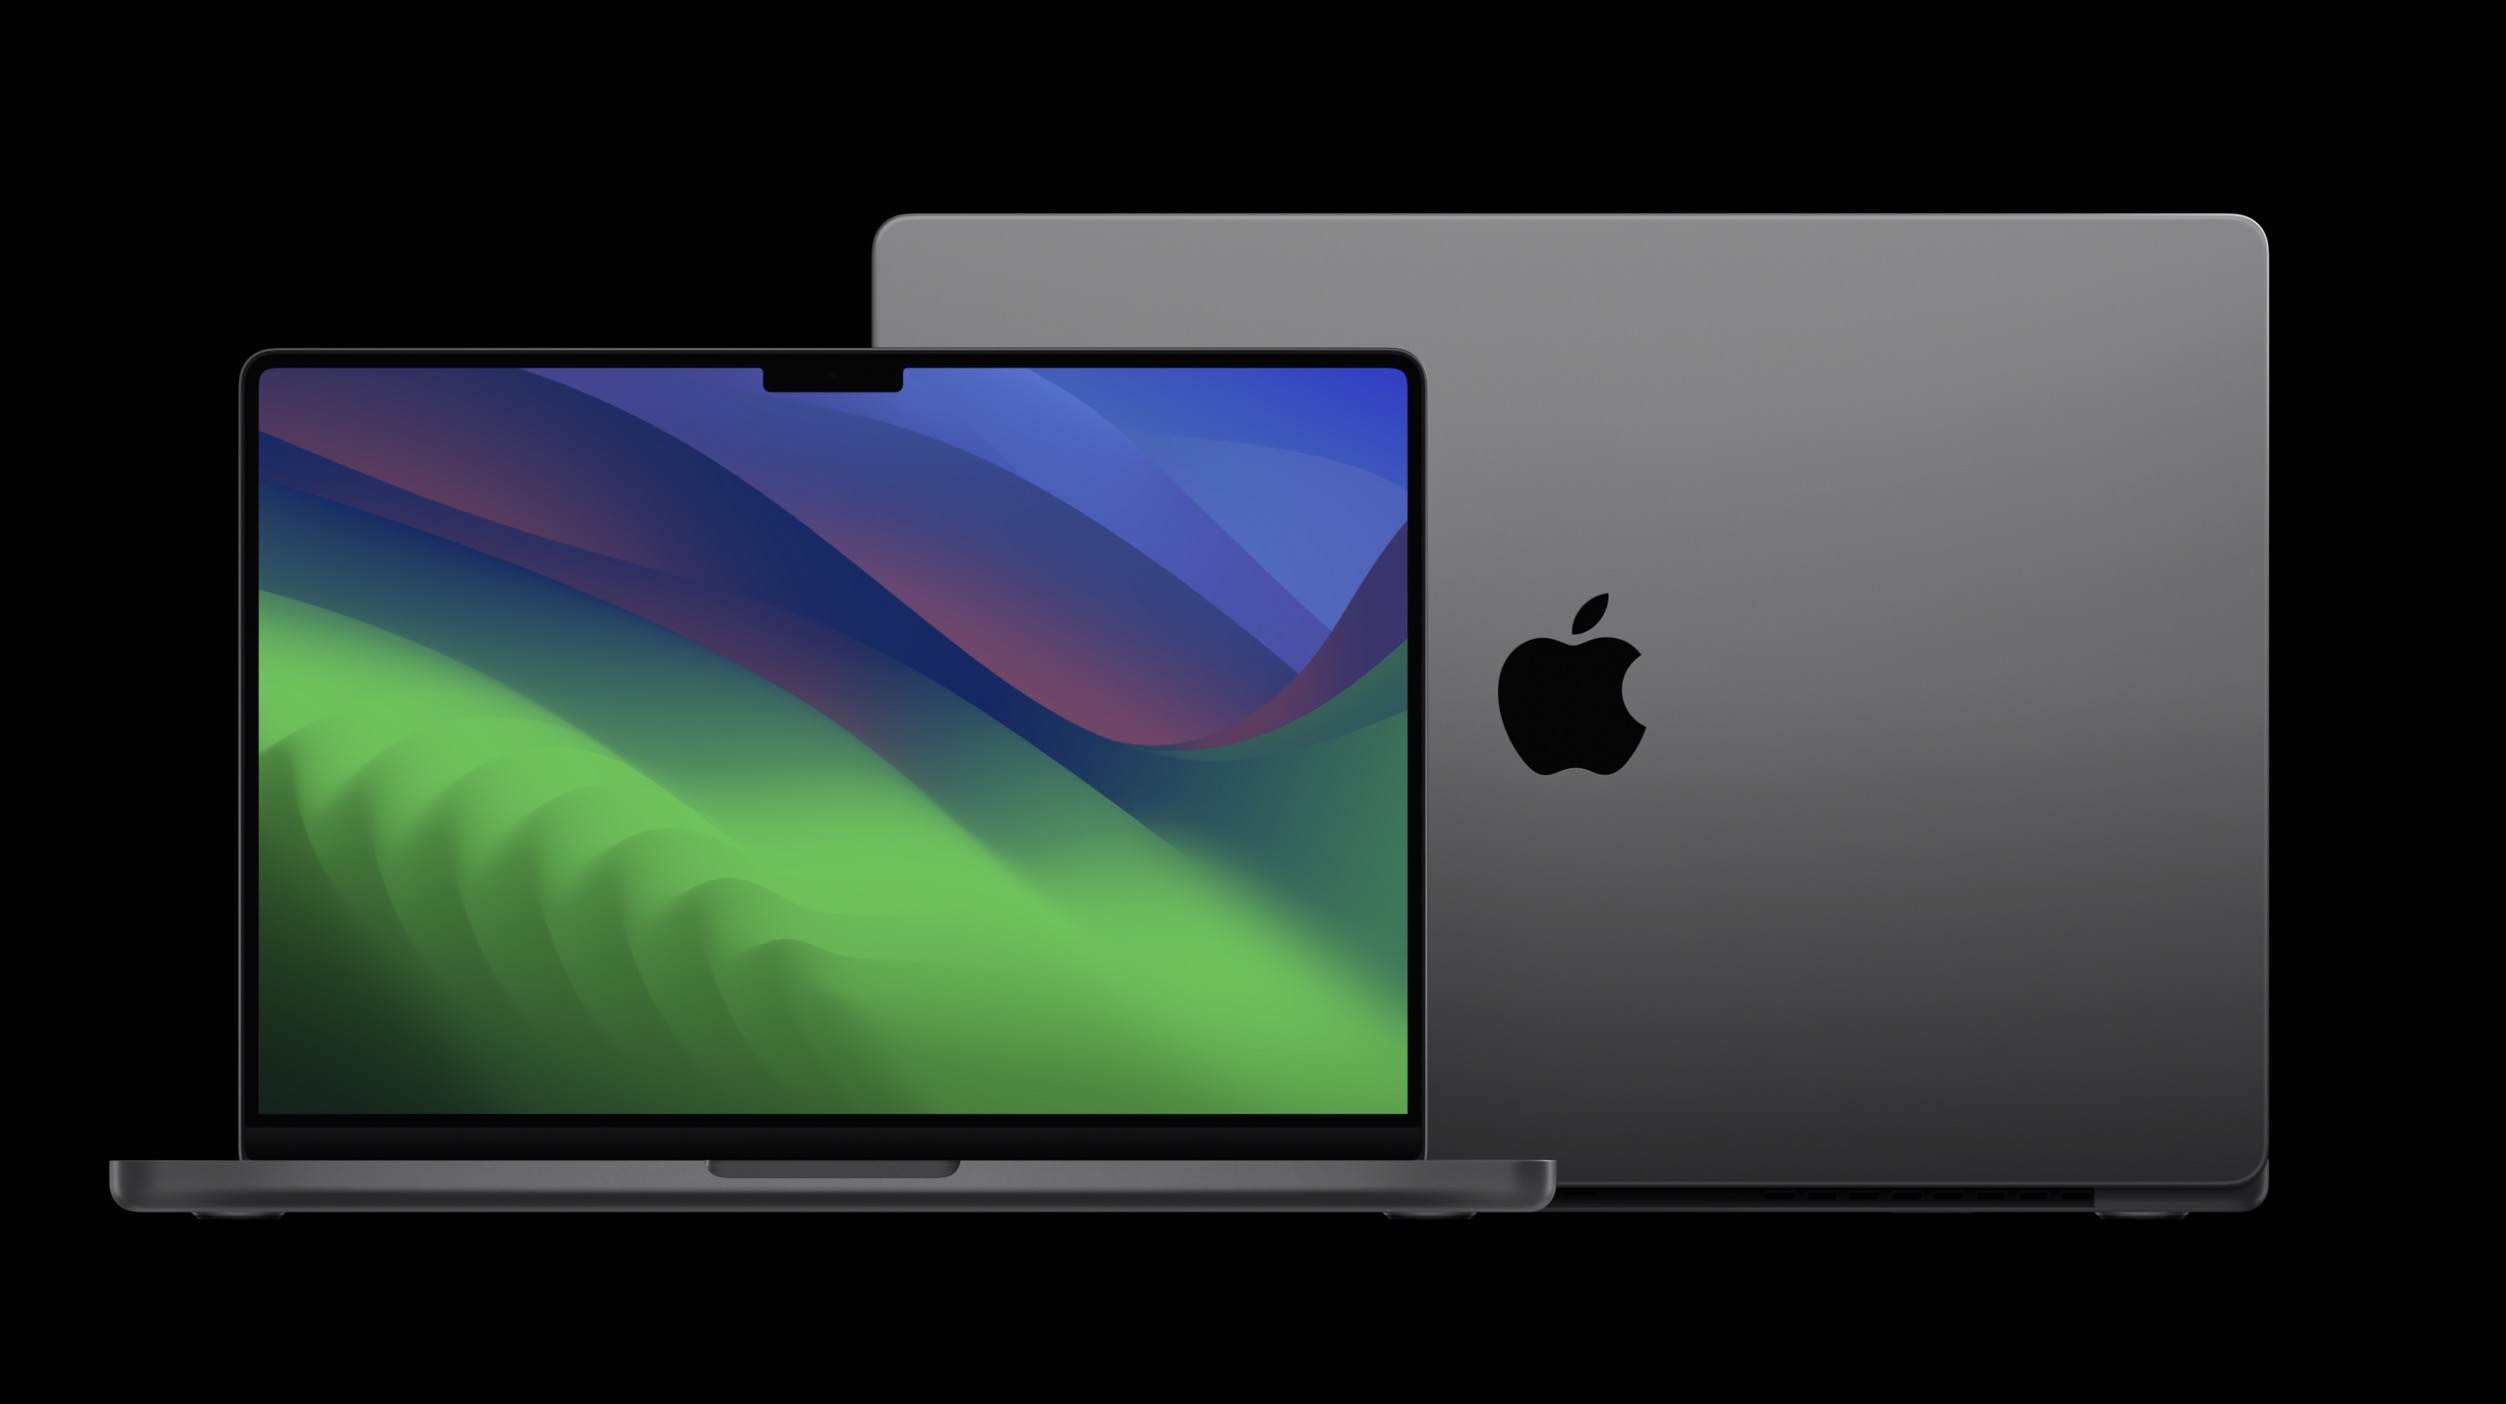 Apple's new 16-inch MacBook Pro still uses a 720p webcam and lacks Wi-Fi 6  — unlike iPhone 11 - 9to5Mac